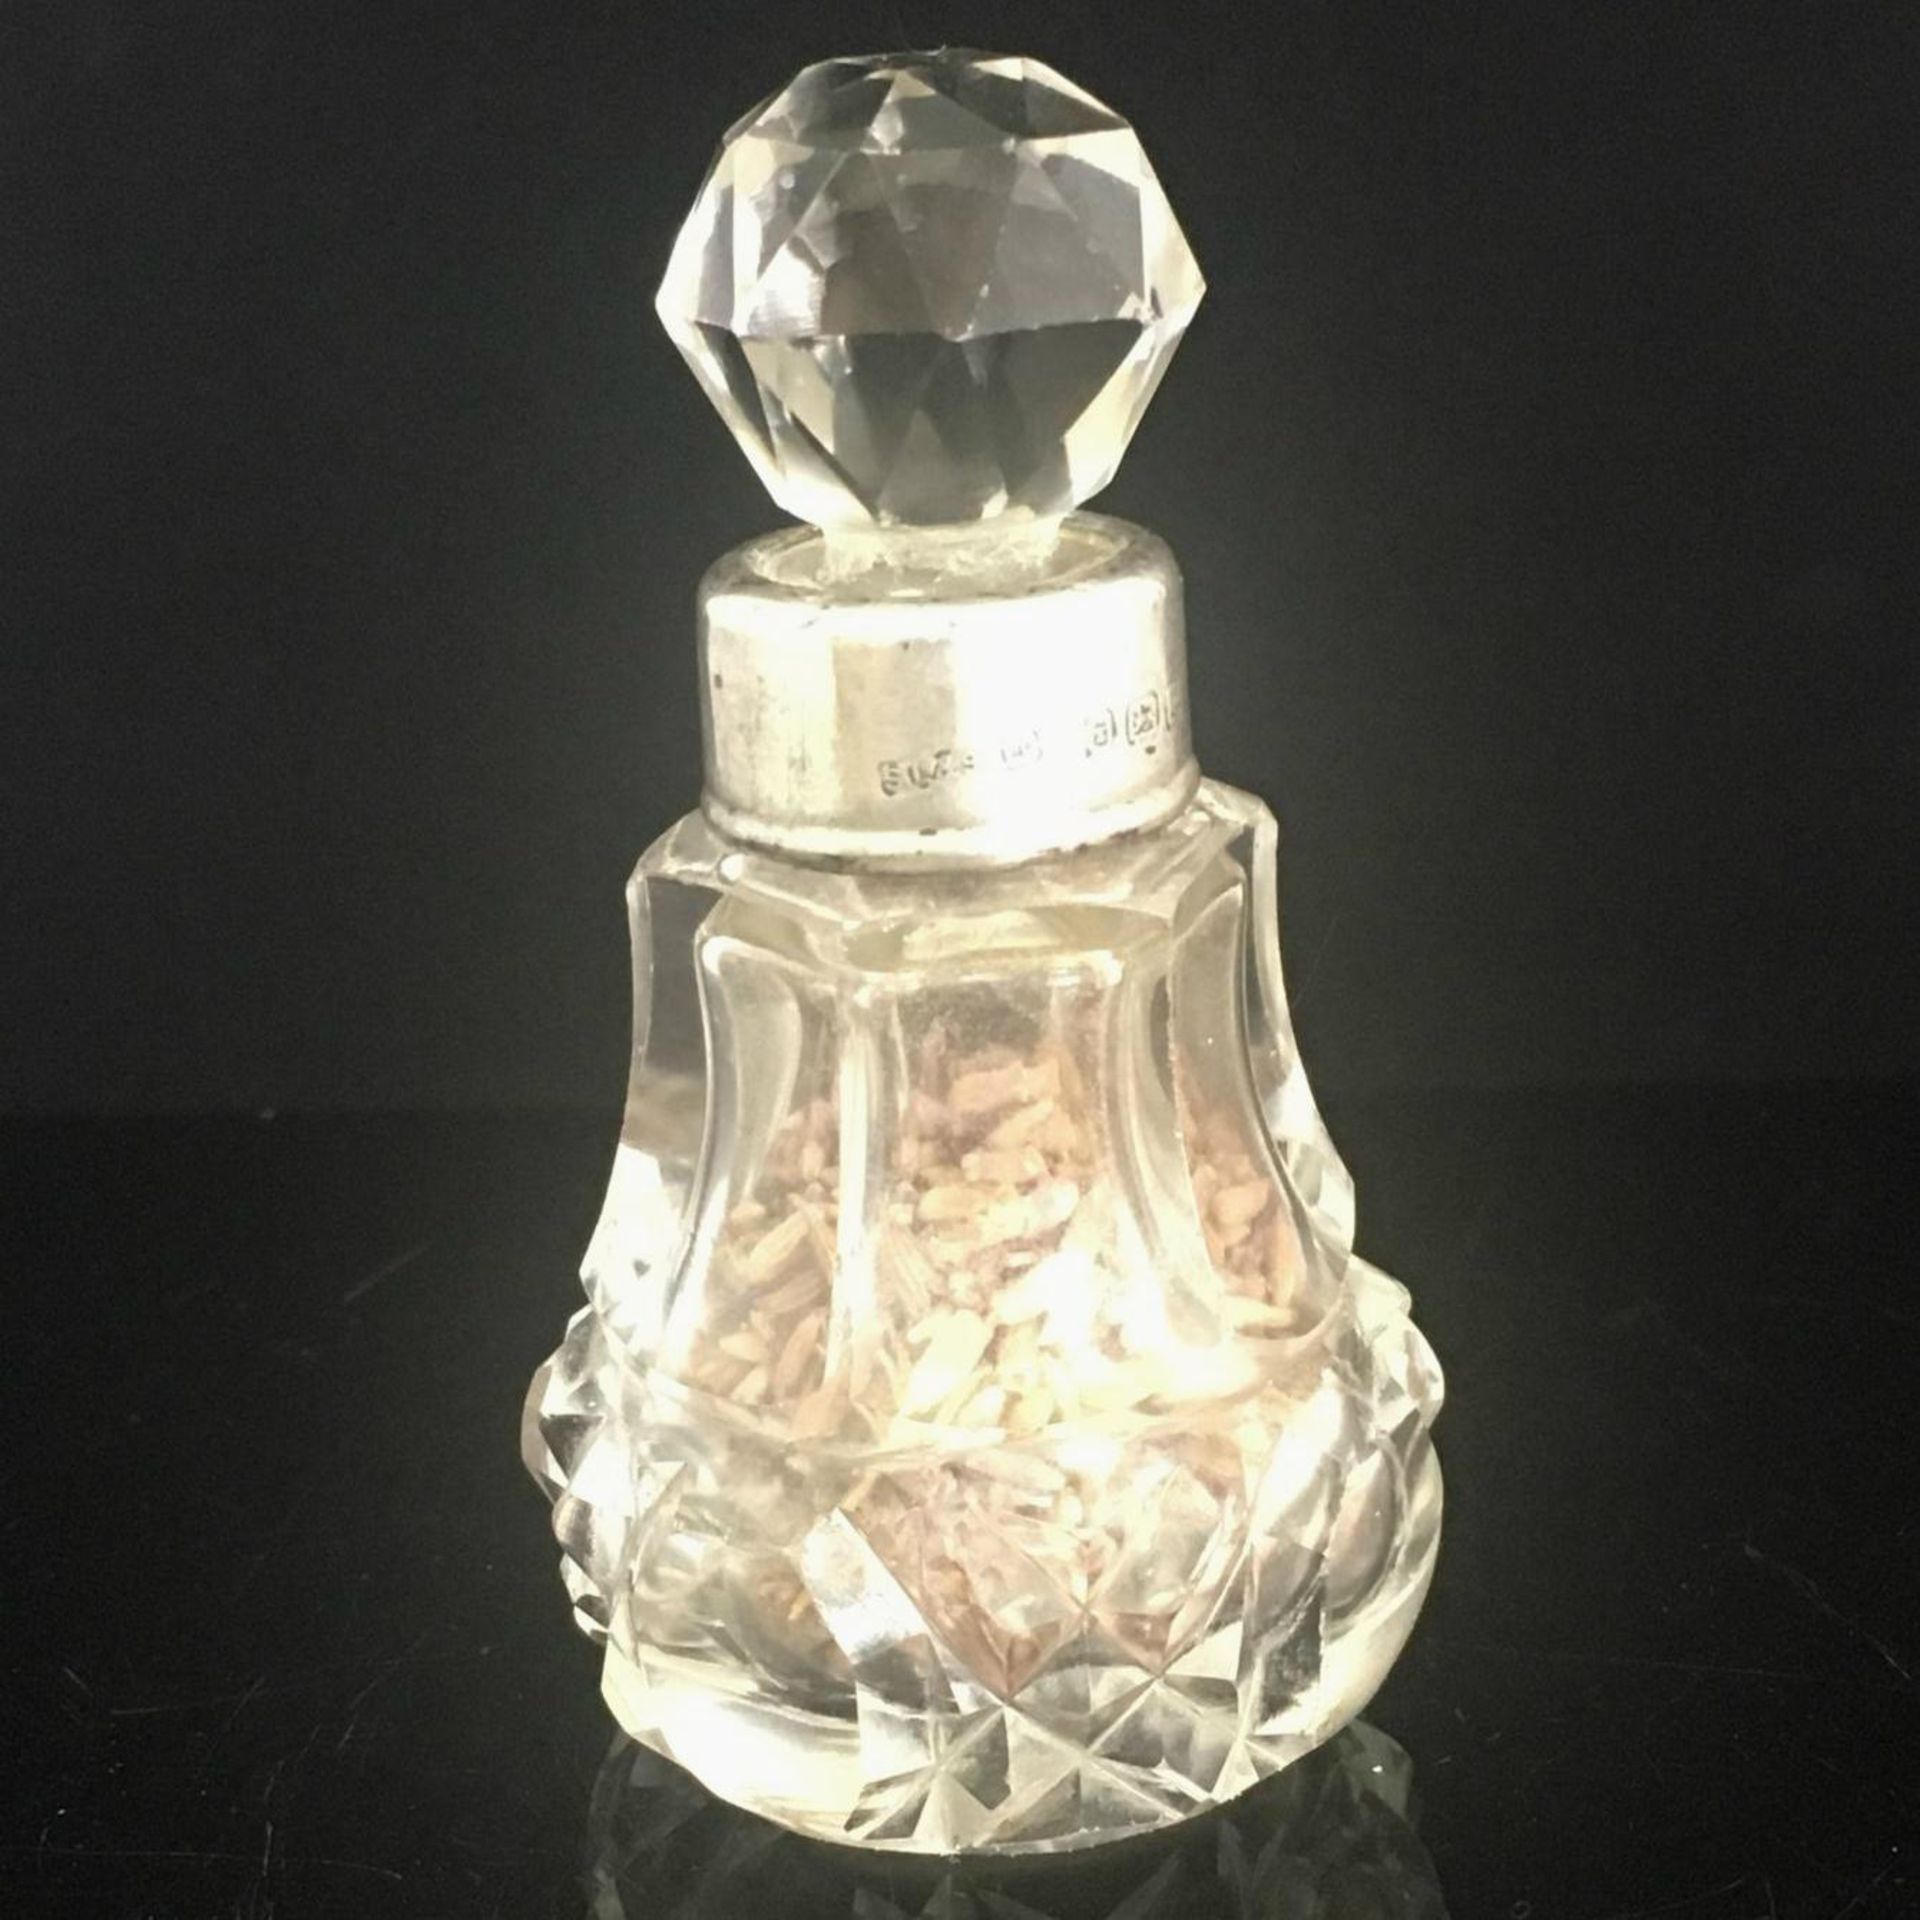 1924 SILVER COLLAR CRYSTAL GLASS VANITY PERFUME BOTTLE. Complete with original stopper and fully